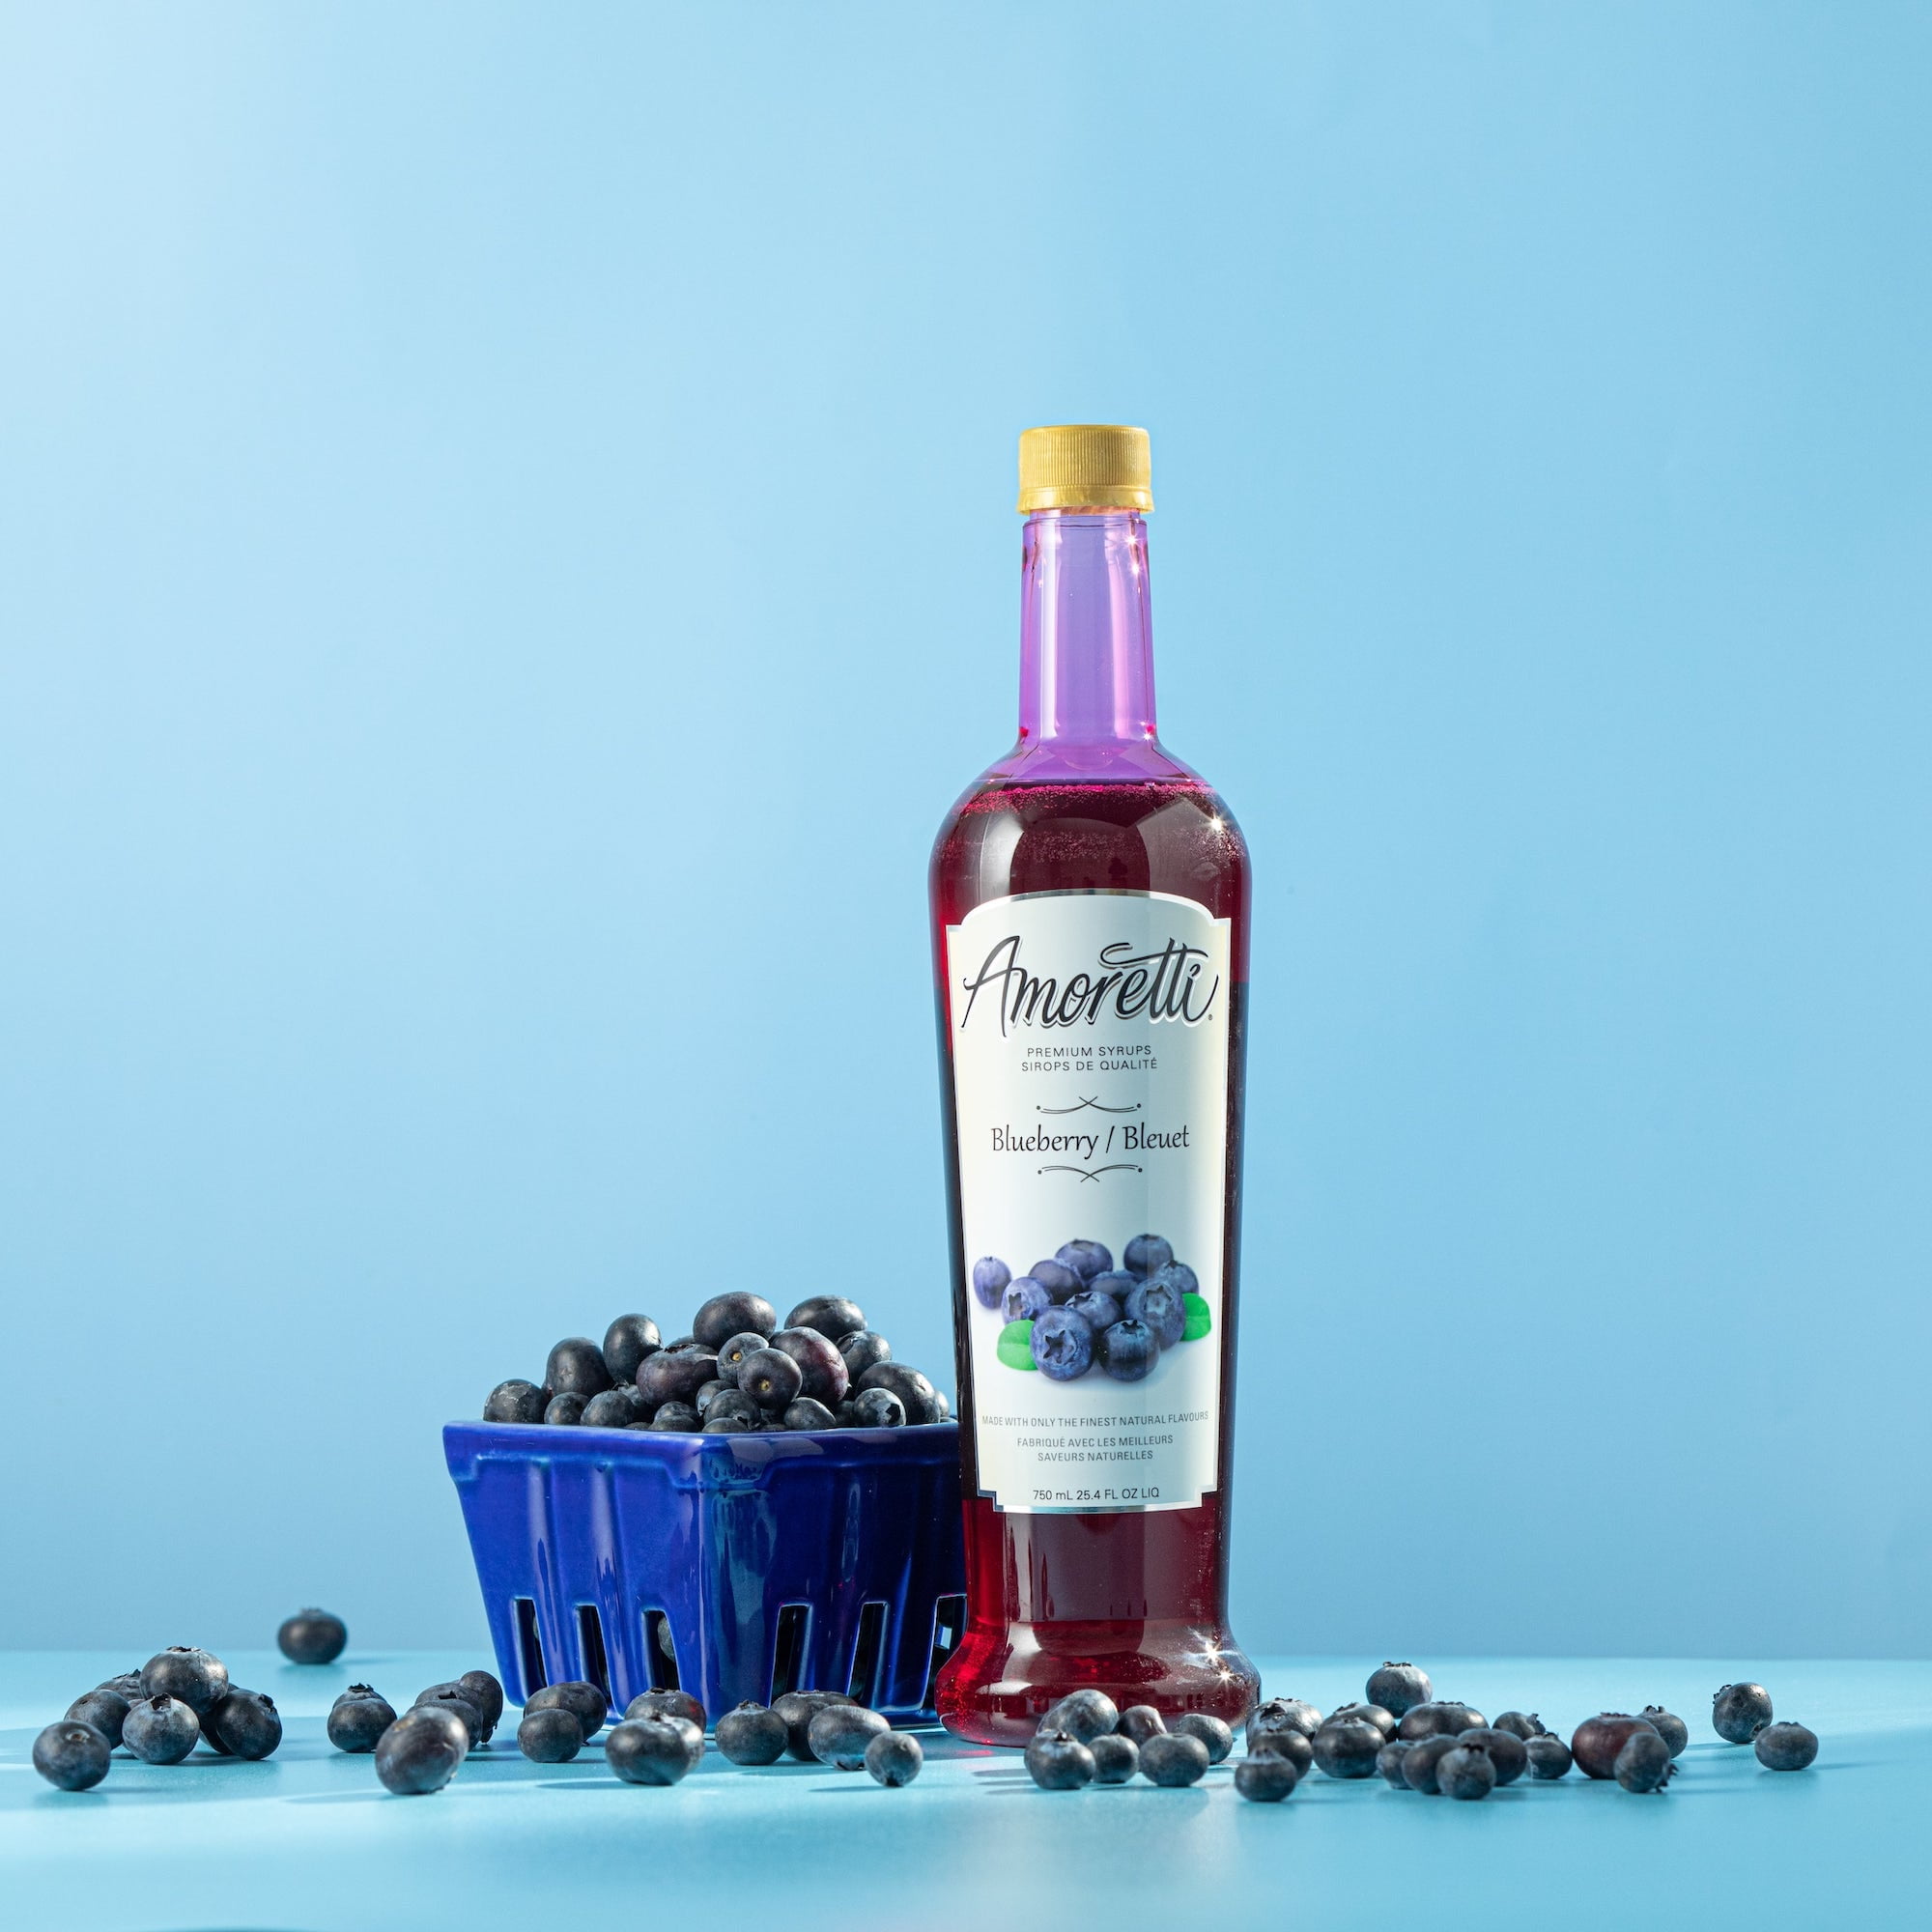 Amoretti - Premium Blueberry Syrup with Pump for Flavoring Coffees